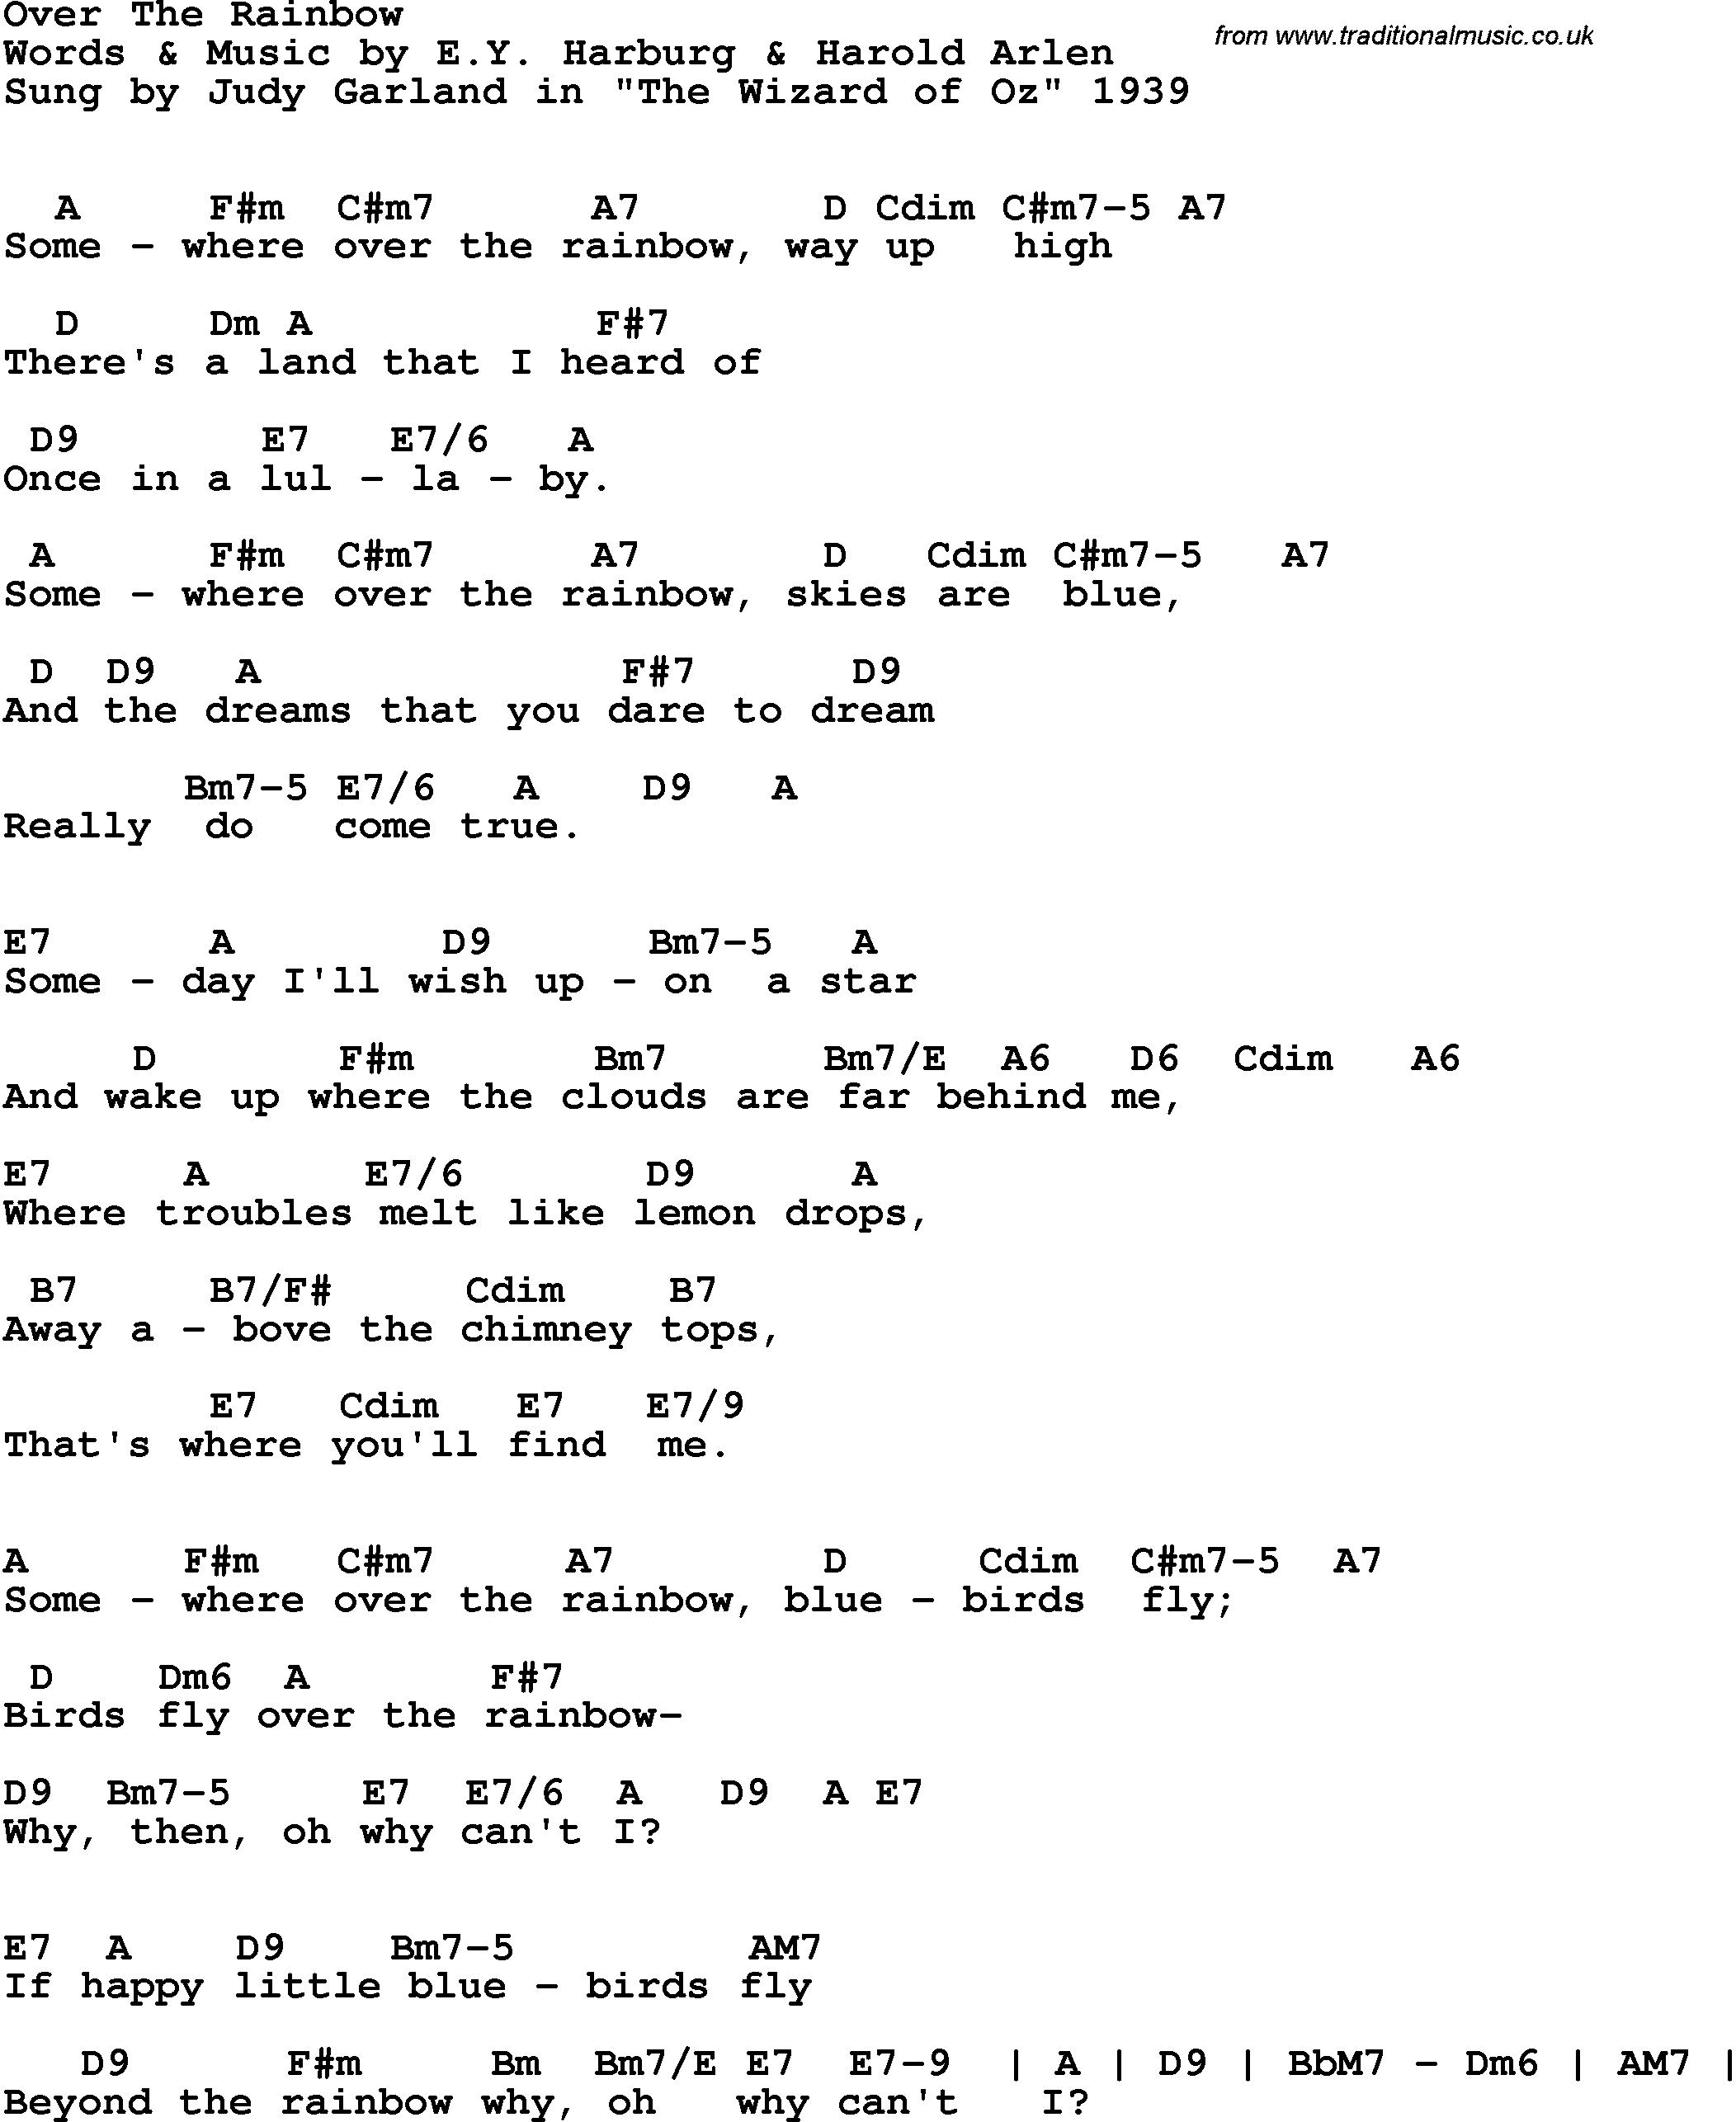 Song Lyrics with guitar chords for Over The Rainbow - Judy Garland, 1939